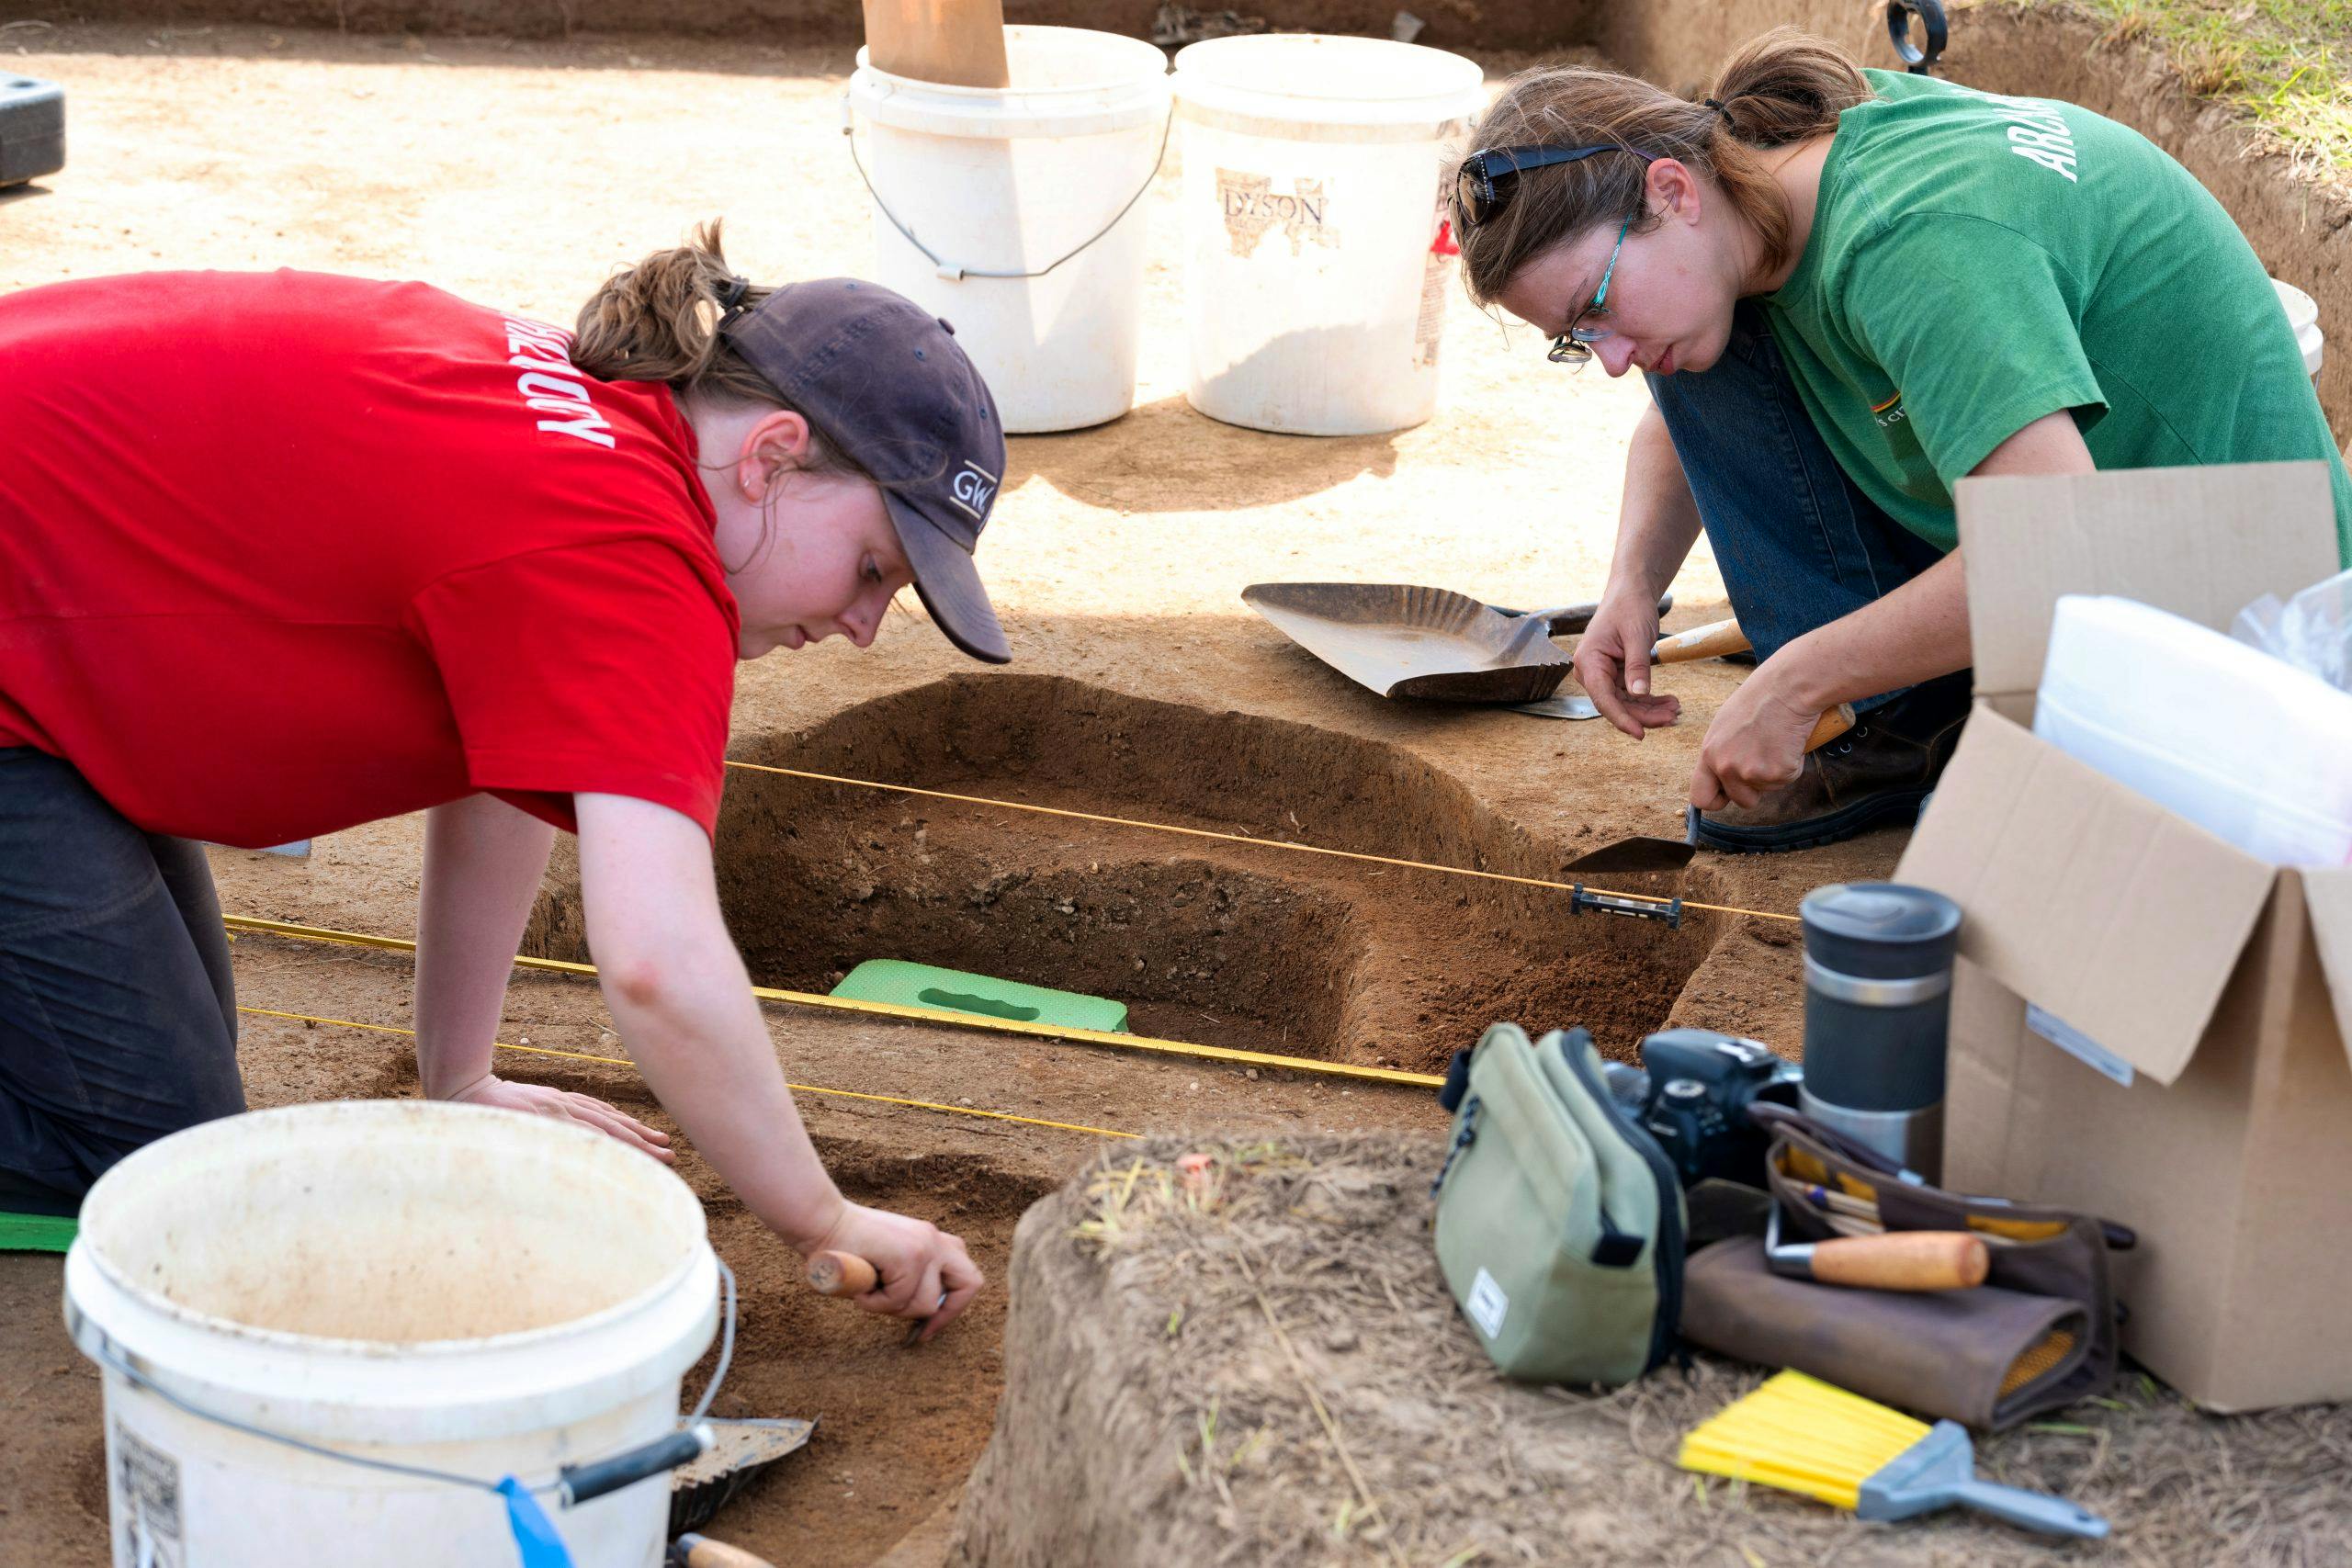 Two people are working at an archaeological dig site. One has a trowel in hand and is digging in the soil.